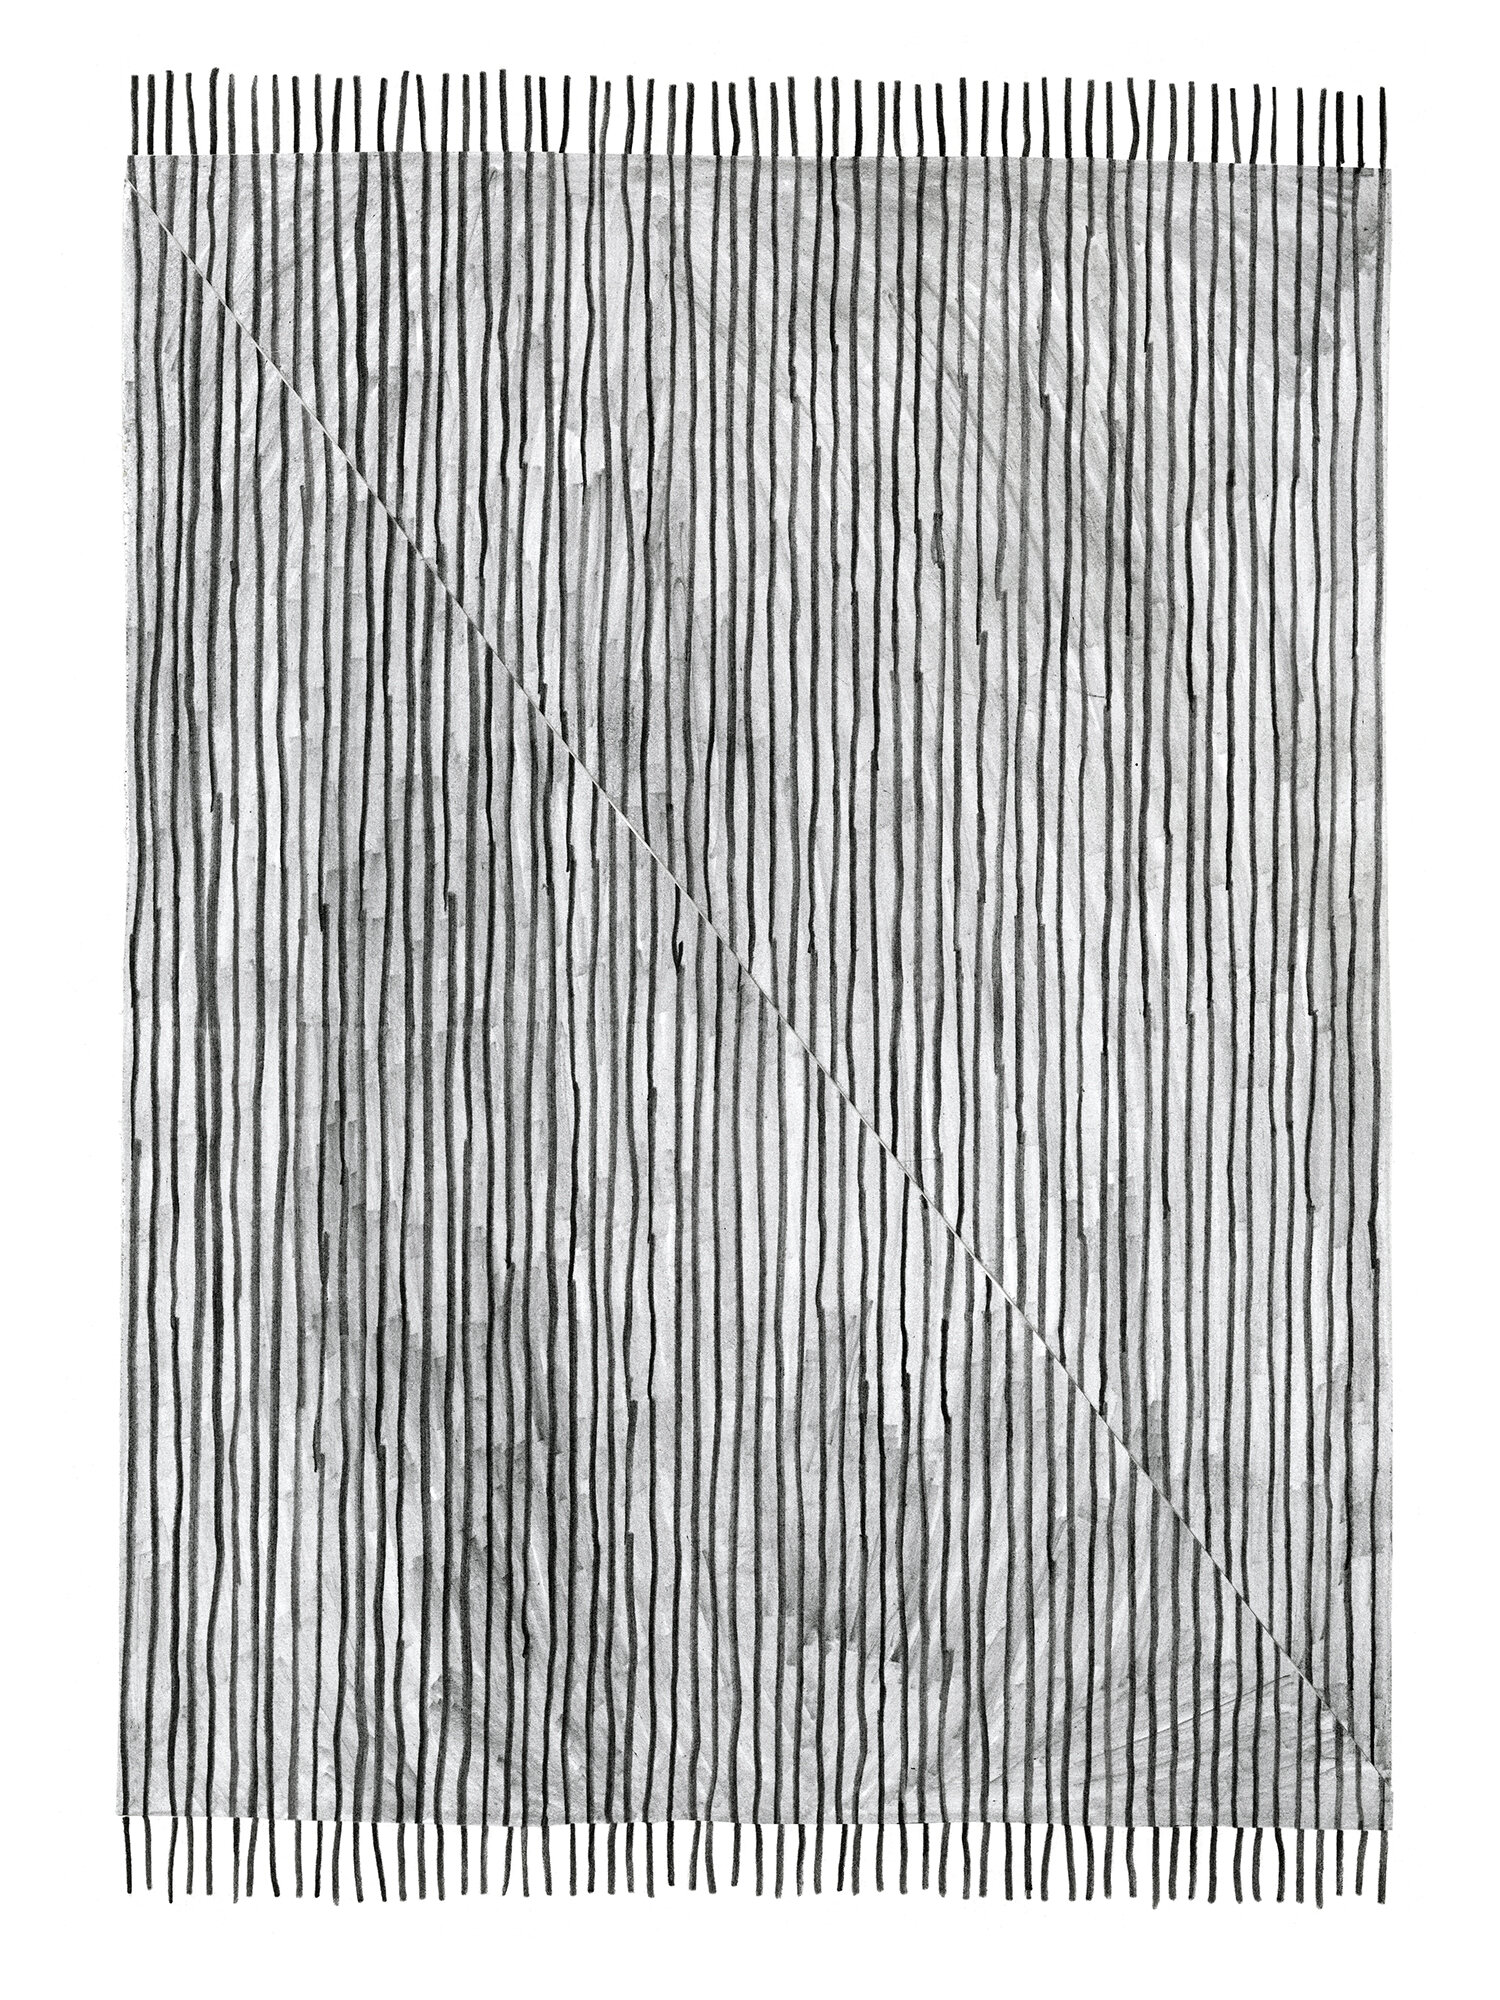   Broken Lines Rug   Pencil on paper 12 x 9 inches    